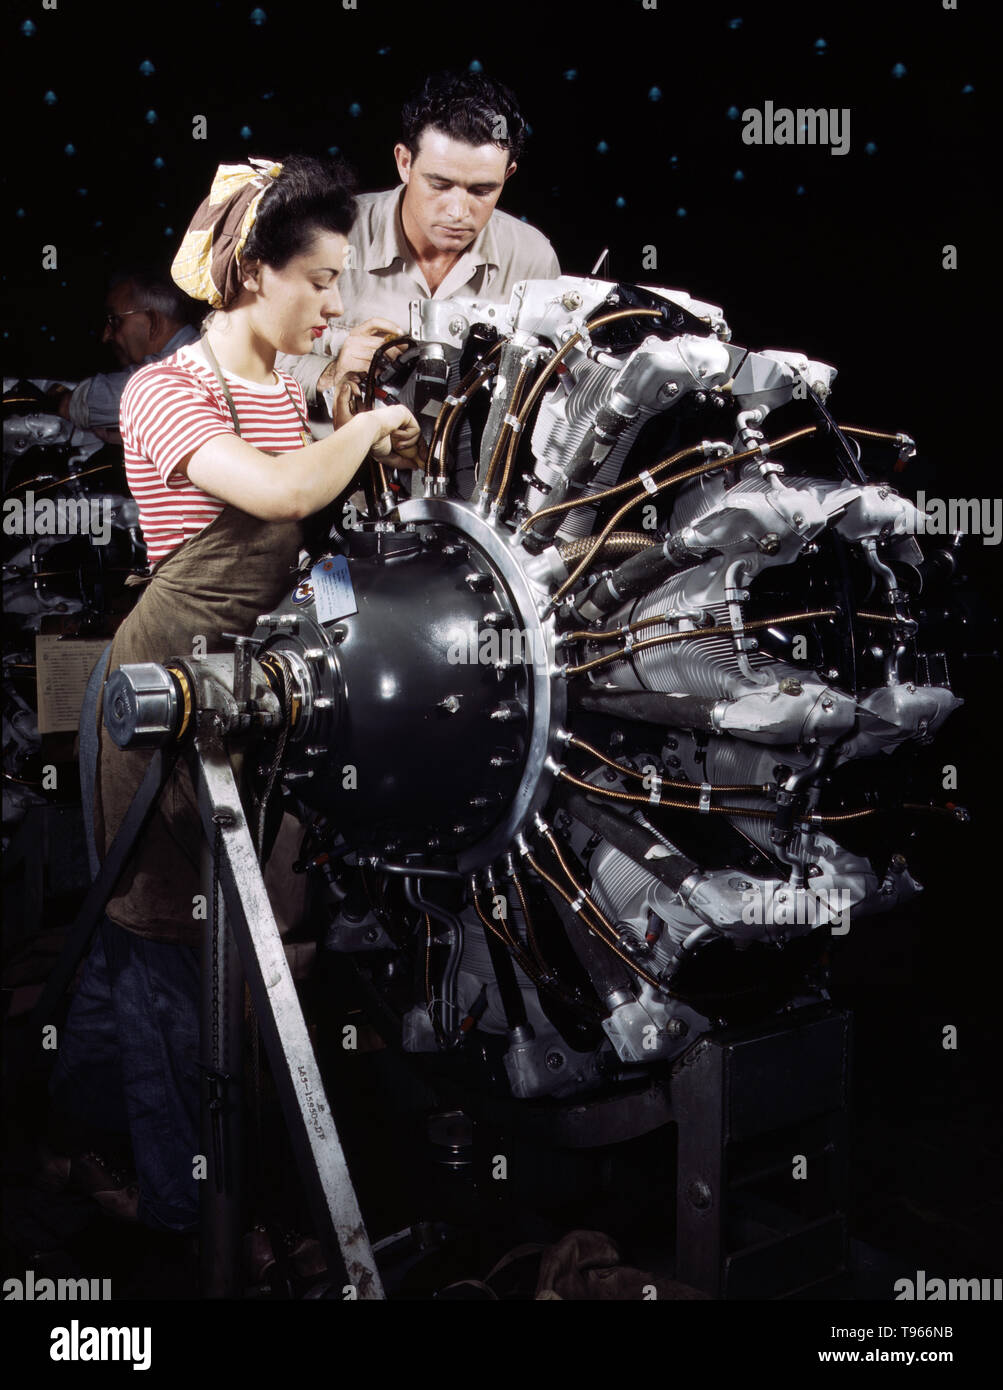 Women are trained as engine mechanics in thorough Douglas training methods, Douglas Aircraft Company, Long Beach, California. Although the image of 'Rosie the Riveter' reflected the industrial work of welders and riveters, the majority of working women filled non-factory positions in every sector of the economy. What unified the experiences of these women was that they proved to themselves, and the country, that they could do a man's job and could do it well. Photographed by Alfred T. Palmer, 1942. Stock Photo